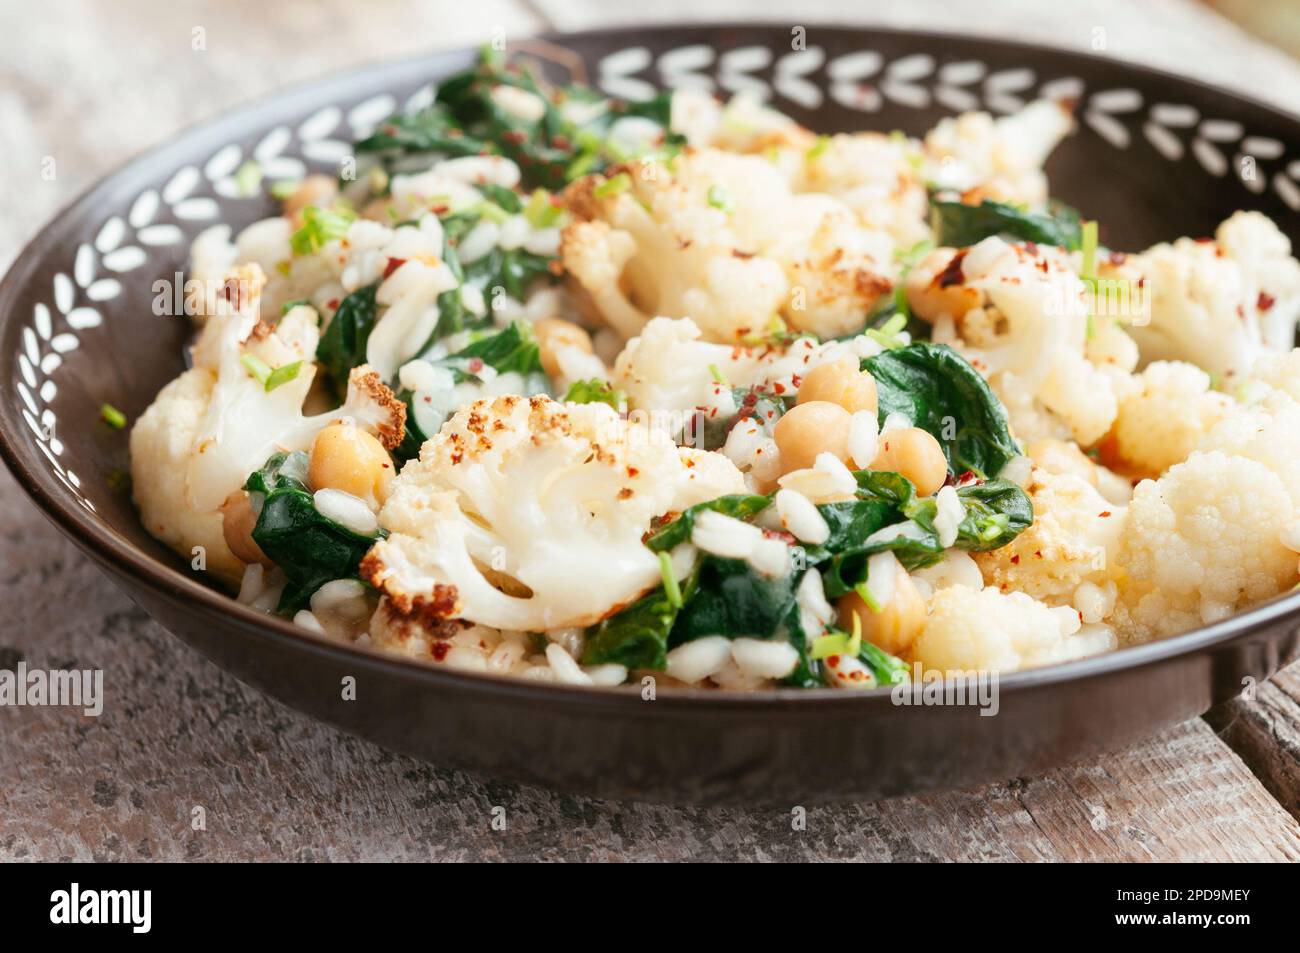 Roasted Cauliflower Risotto with Spinach and Chickpeas Stock Photo